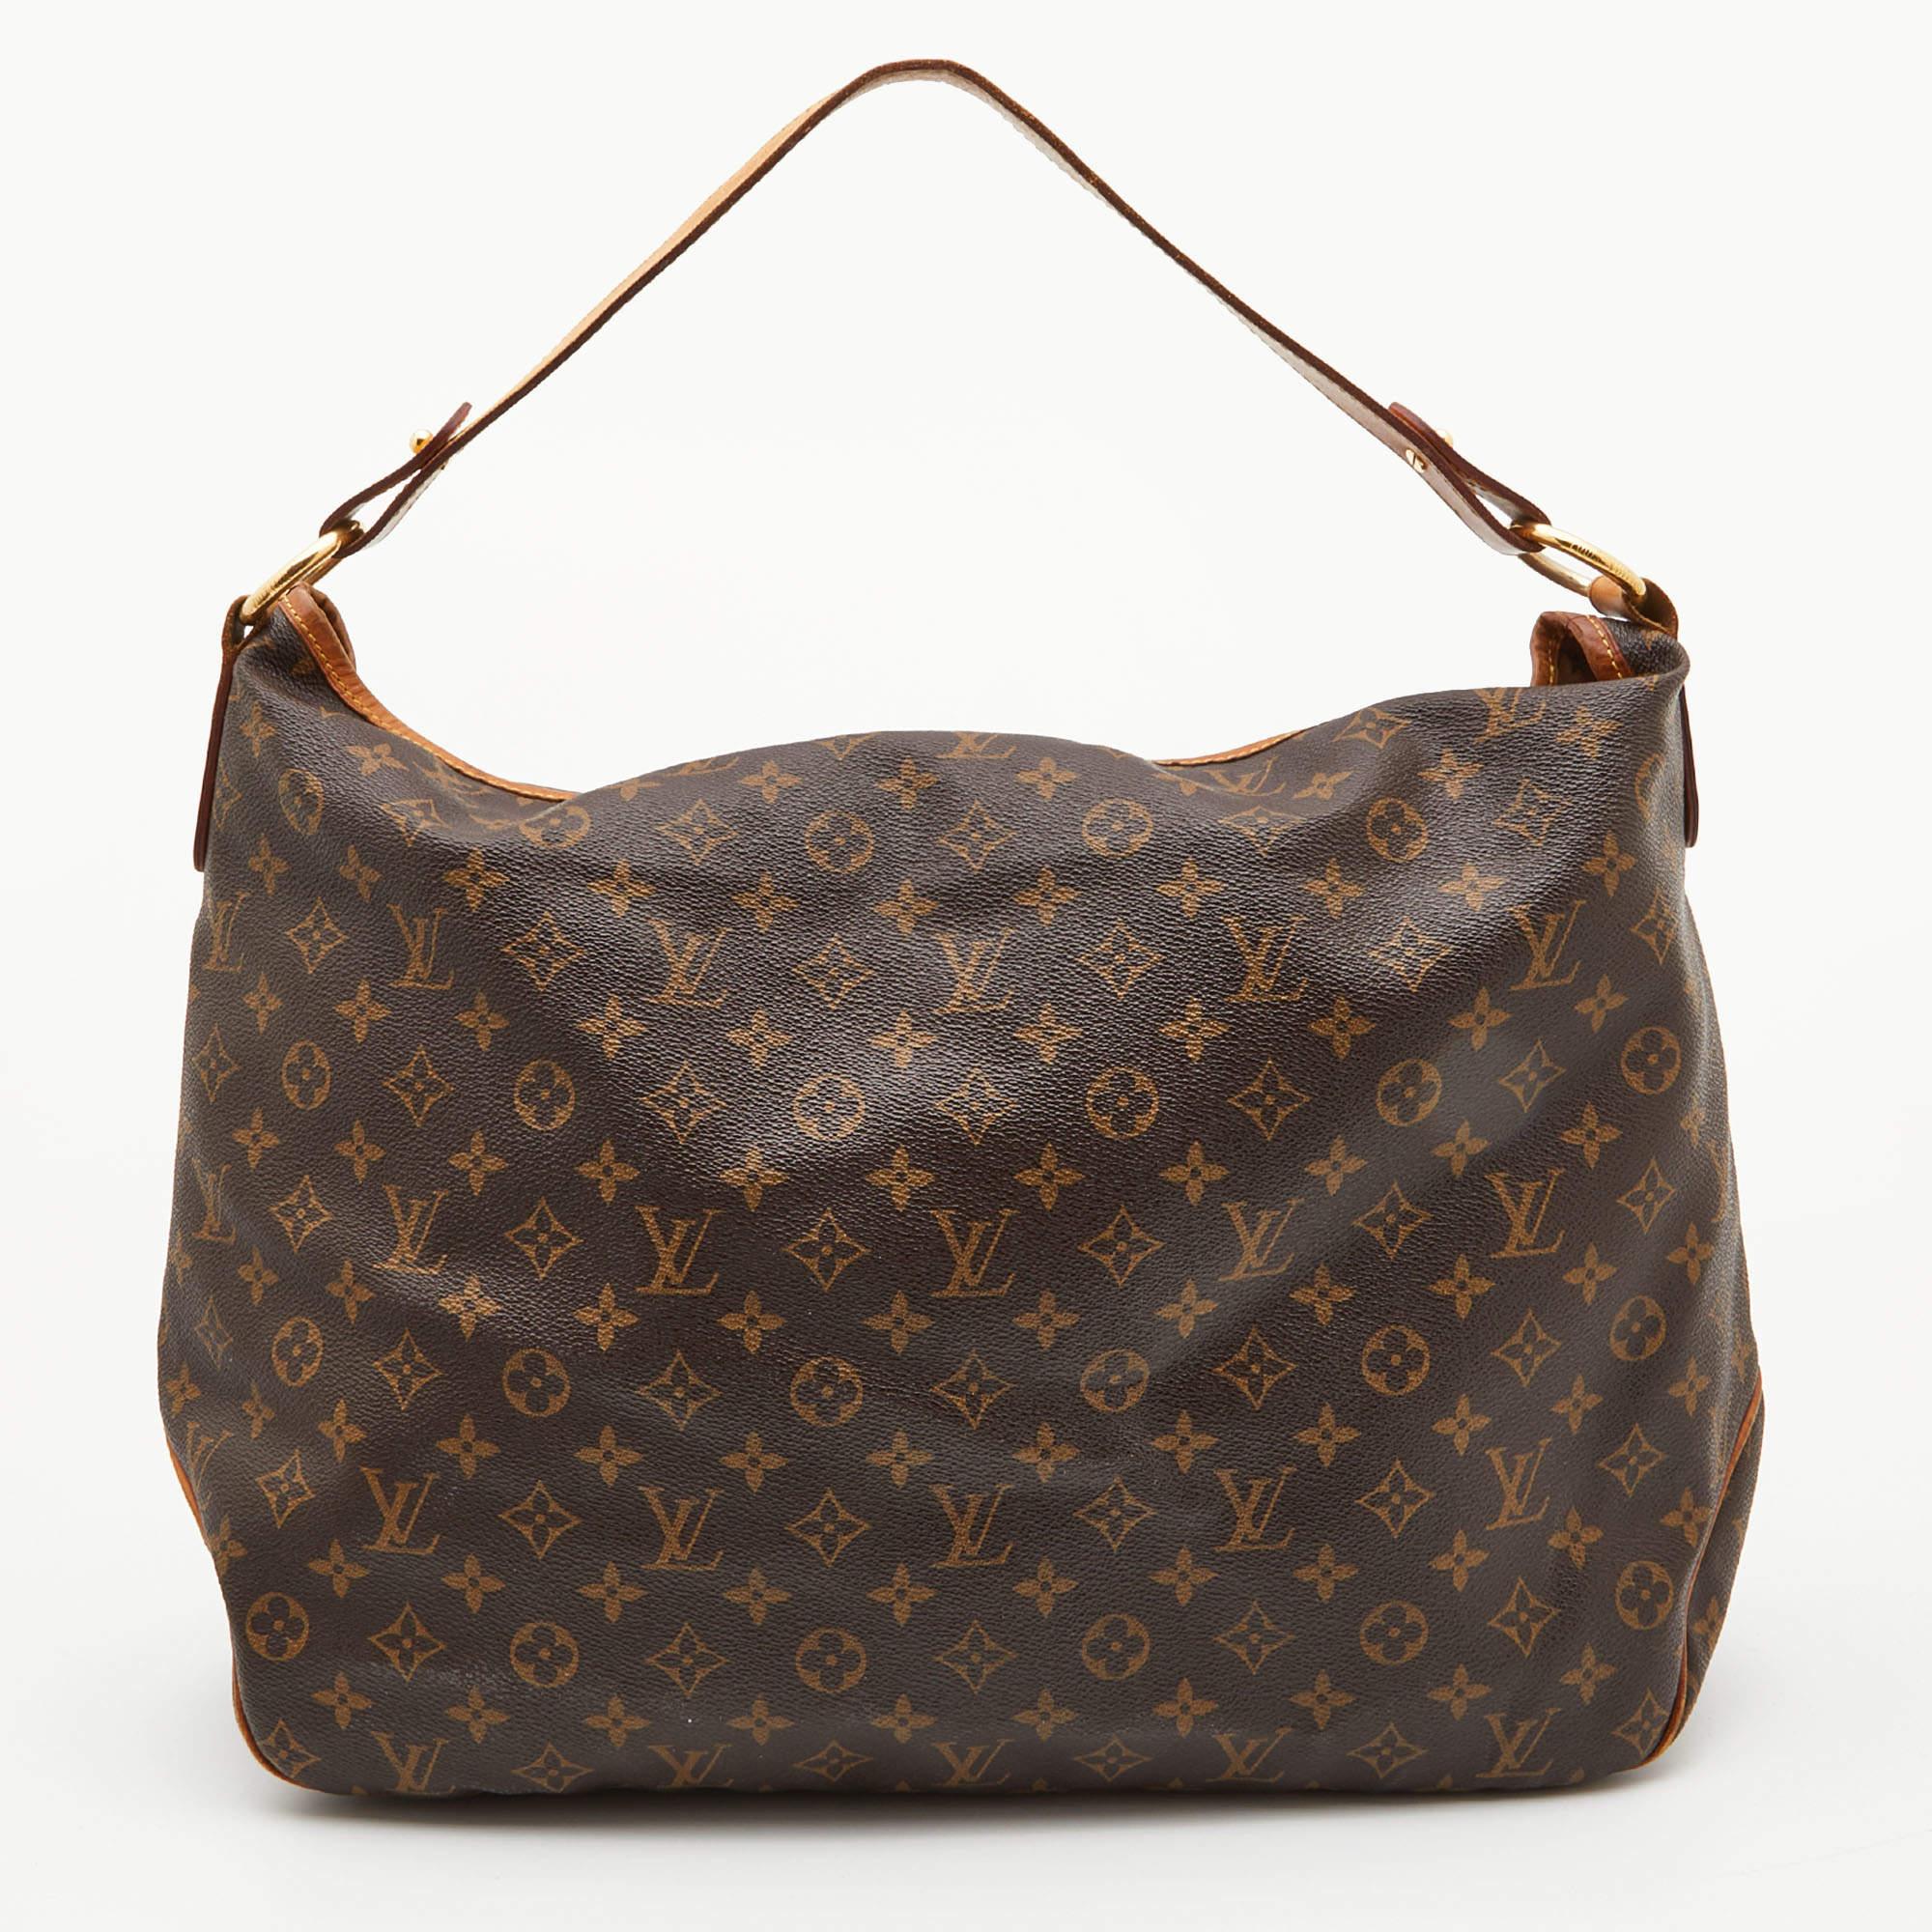 Louis Vuitton's handbags are popular owing to their high style and functionality. This bag, like all their designs, is durable and stylish. Exuding a fine finish, the bag is designed to give a luxurious experience. The interior has enough space to